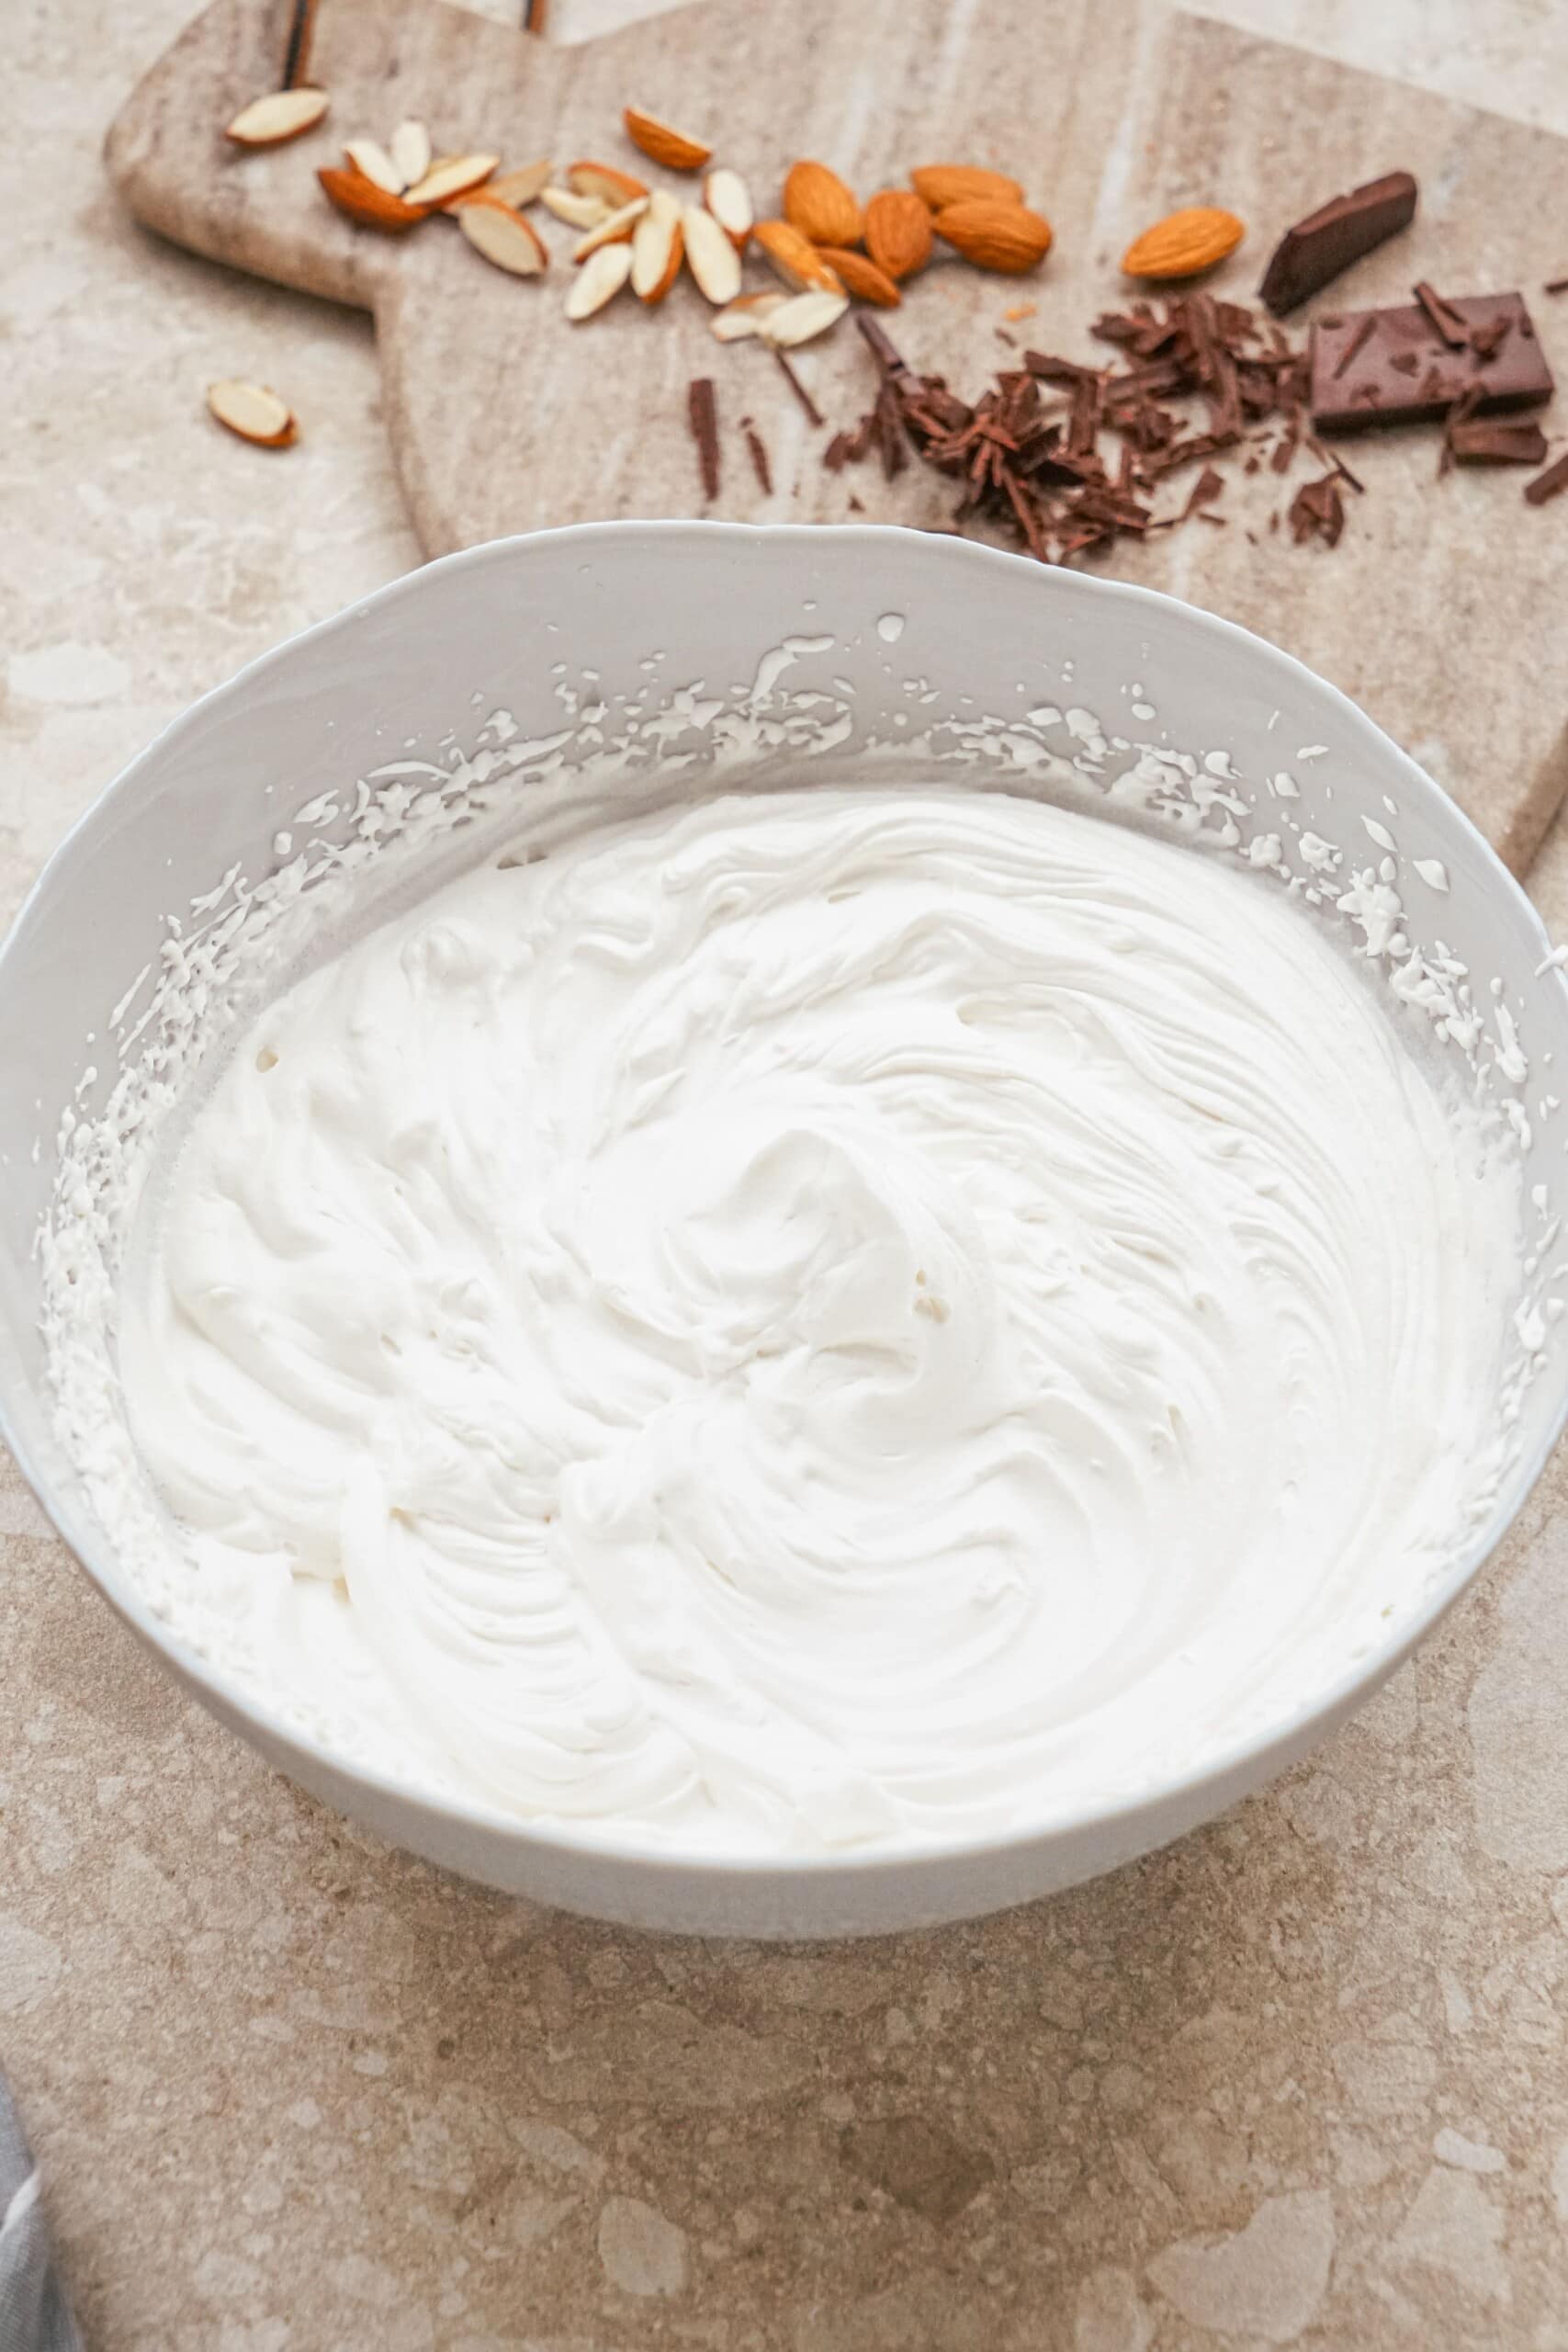 whipped cream in a mixing bowl